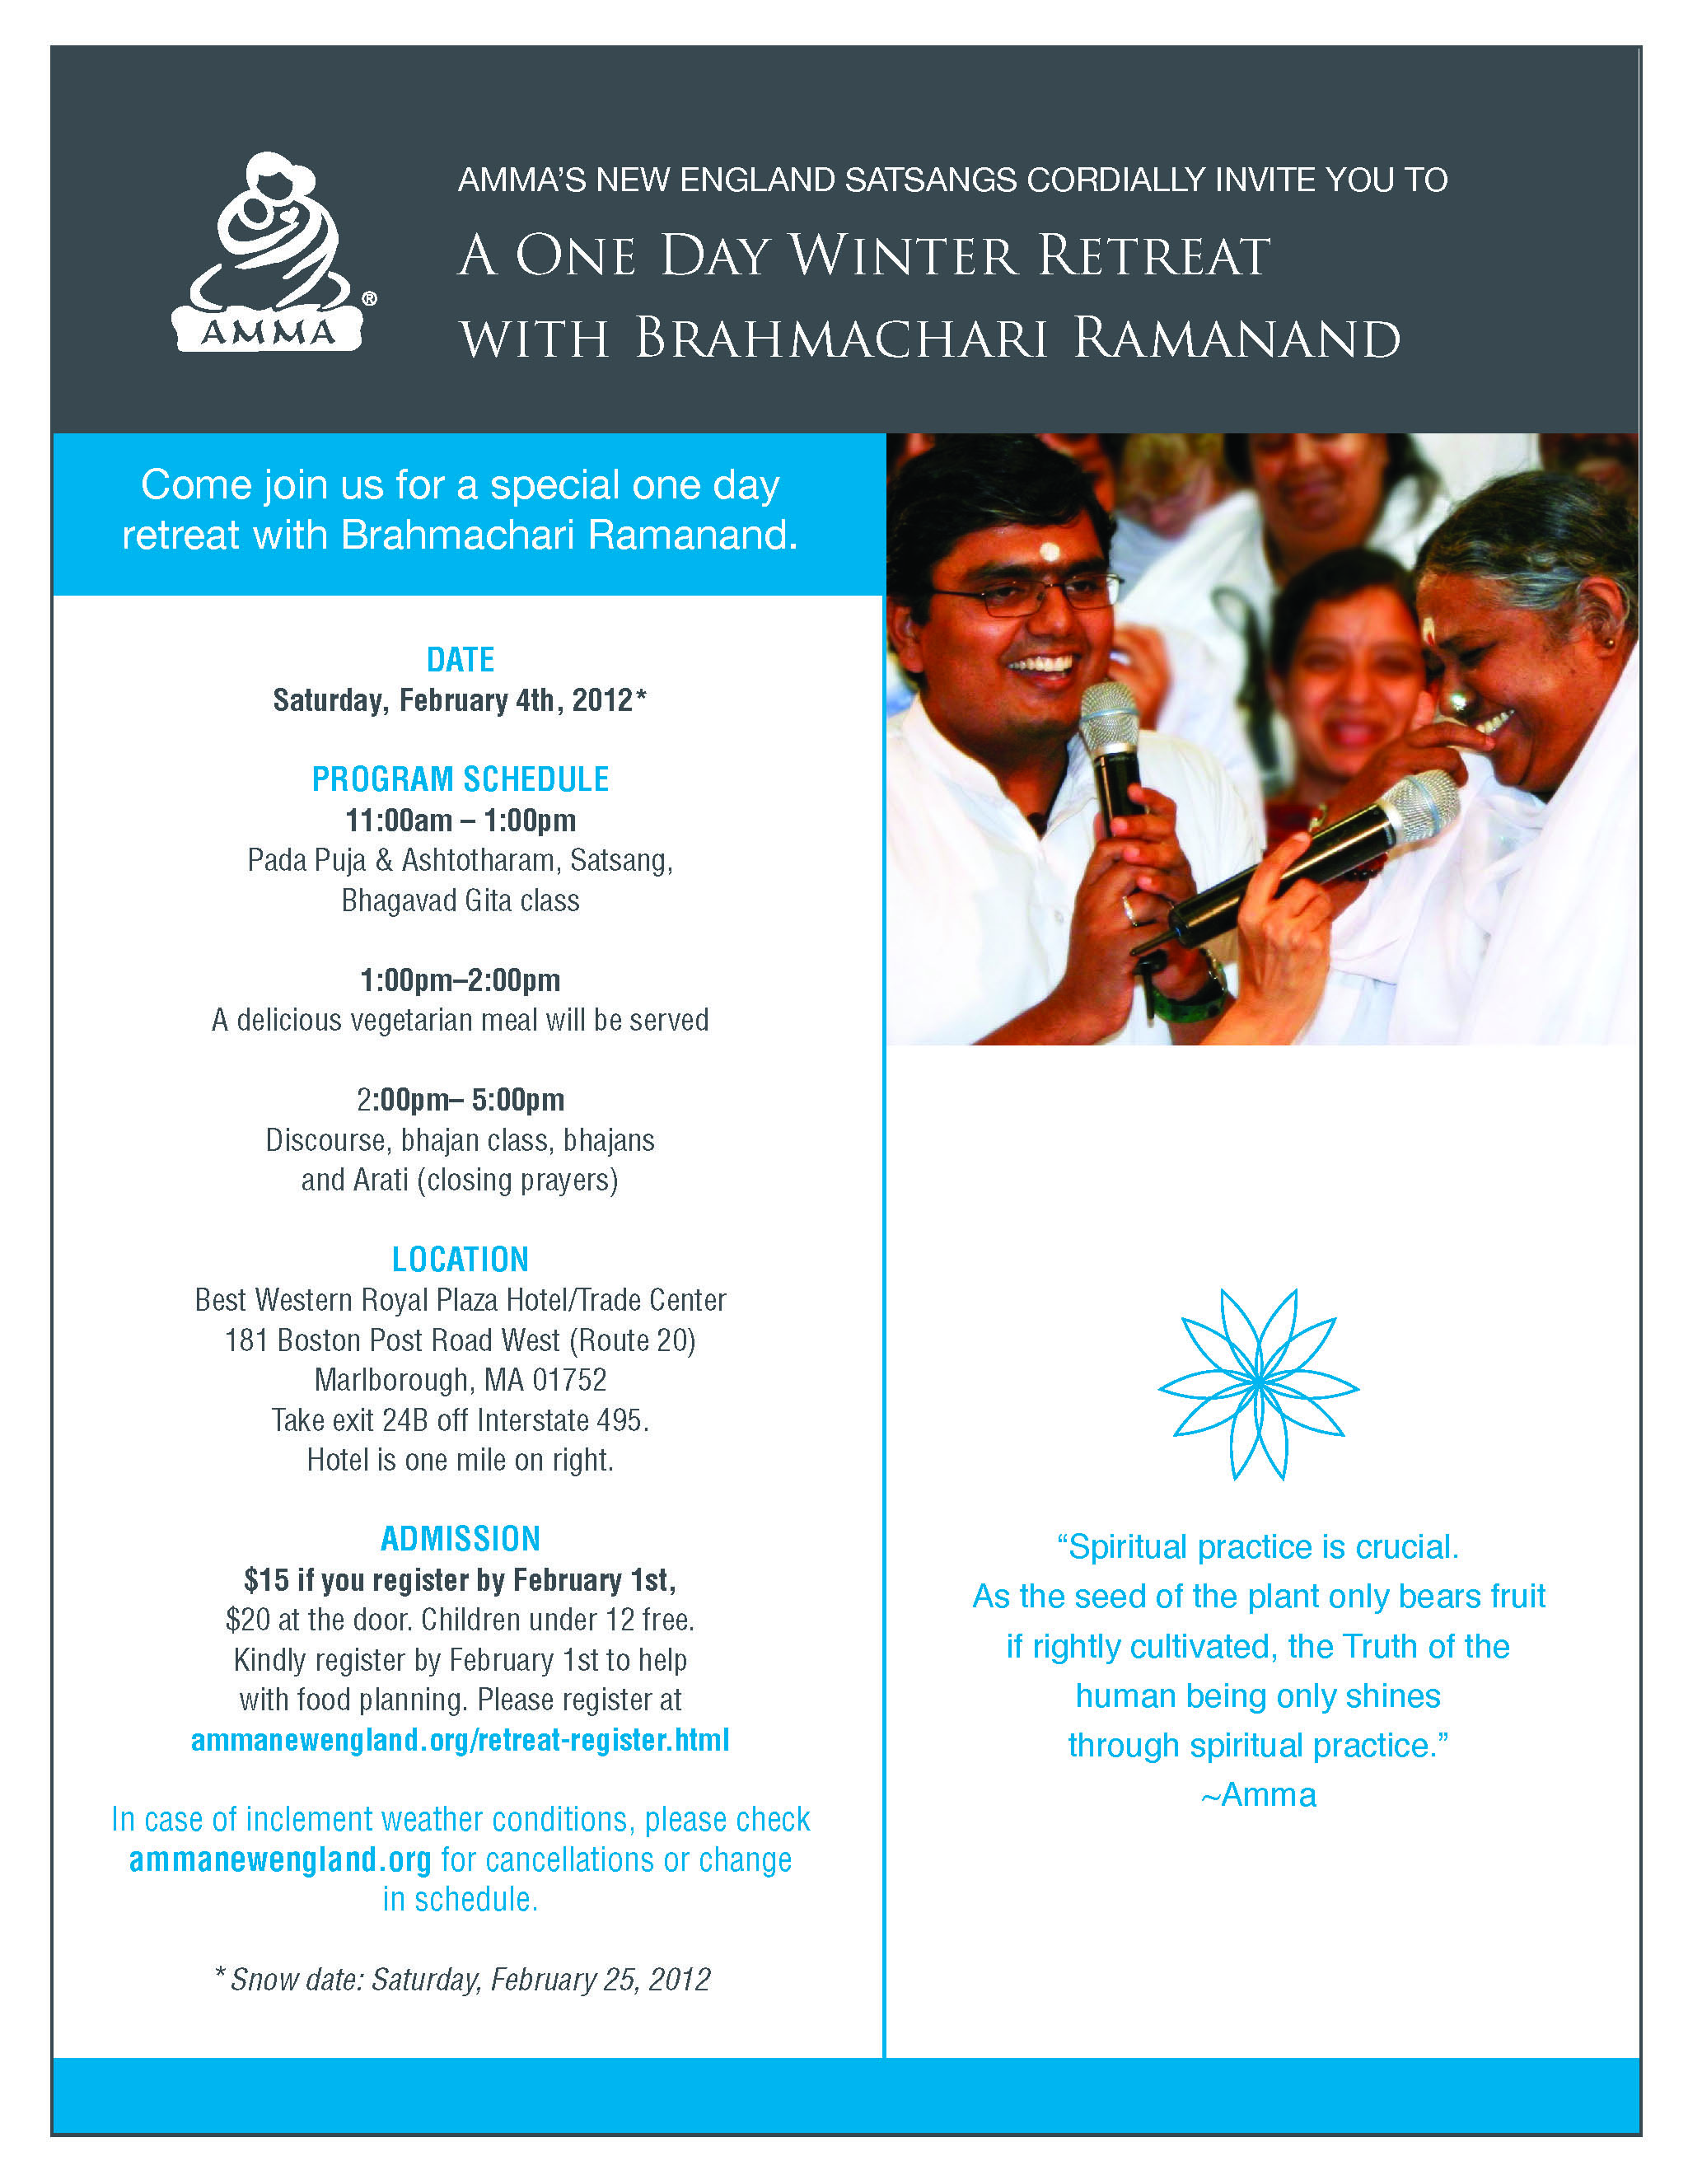 Ramanand's Special Retreat